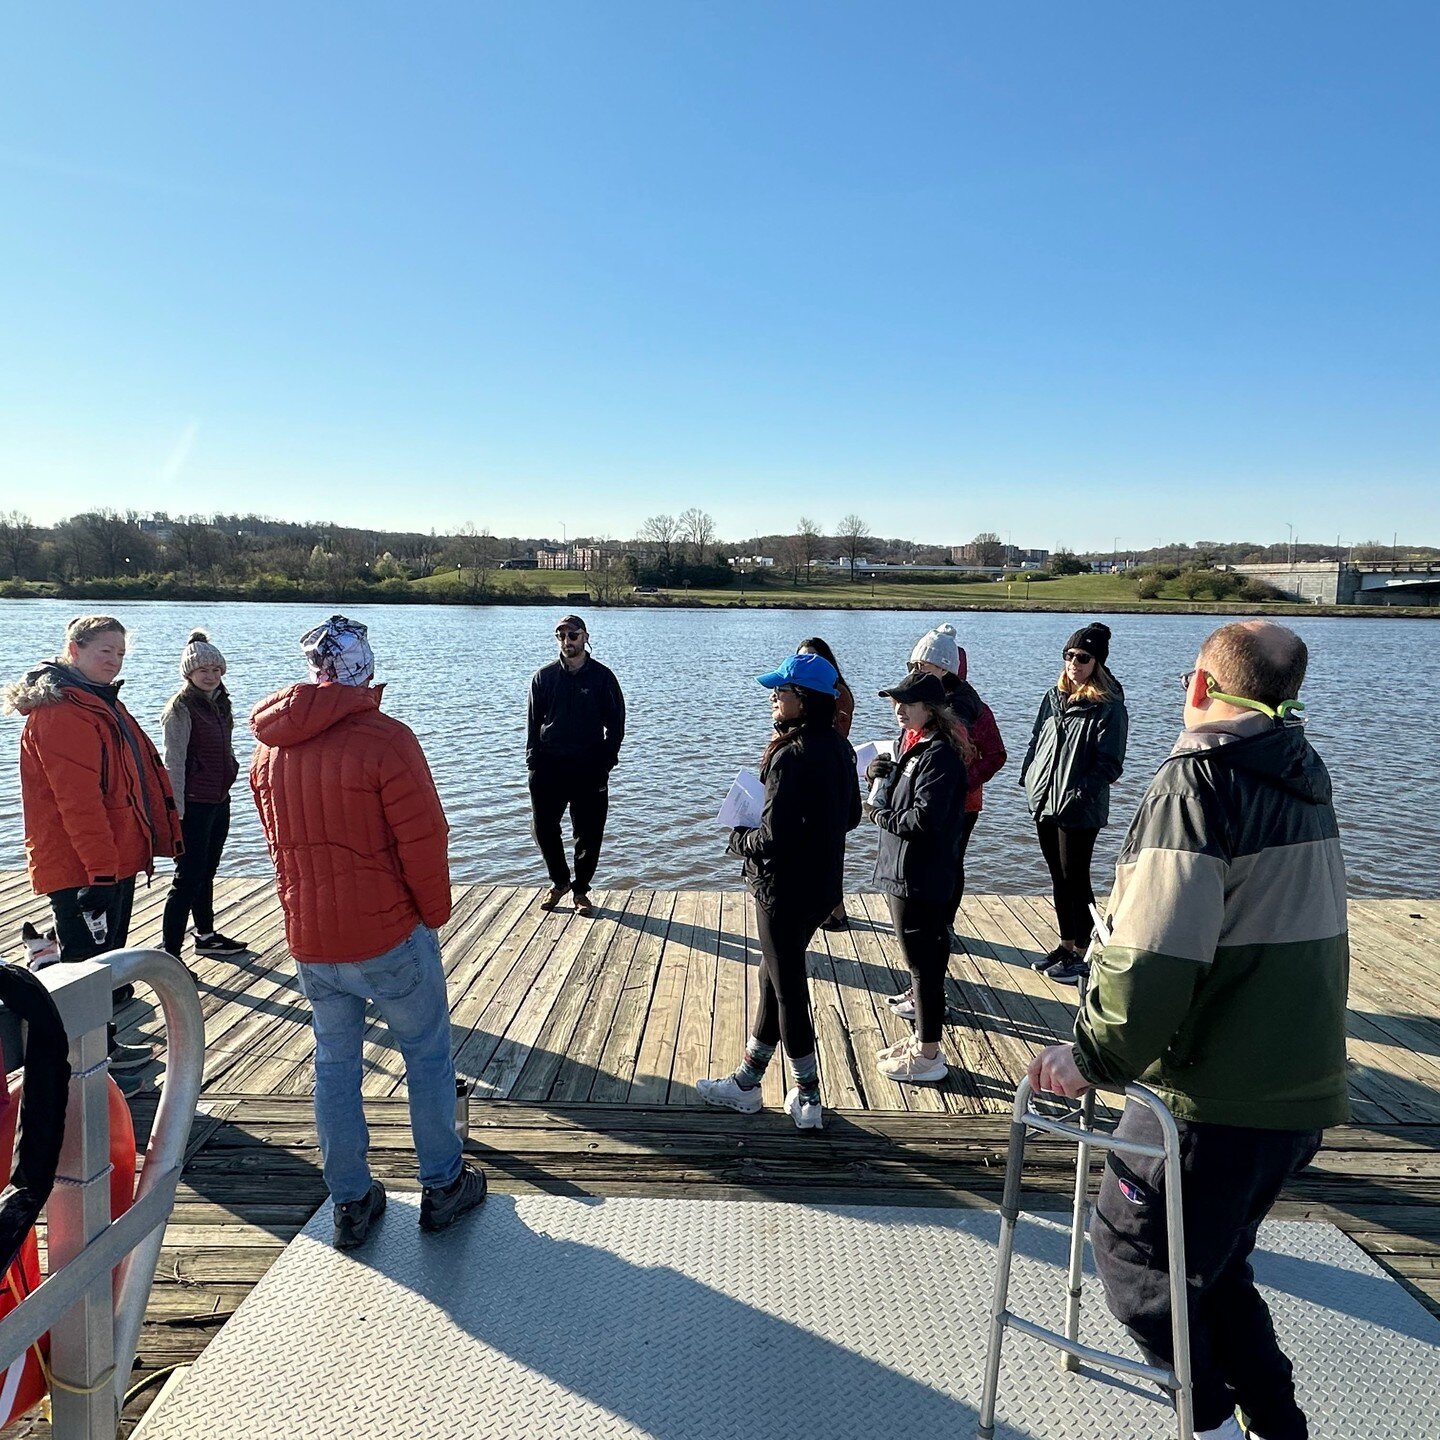 This past Friday, Capital held this year's first coxswain clinic, aimed at helping club coxswains hone their skills on and off the water. Thanks to Kena for leading the charge! 
With the master's season starting on Monday, we're excited to get back o